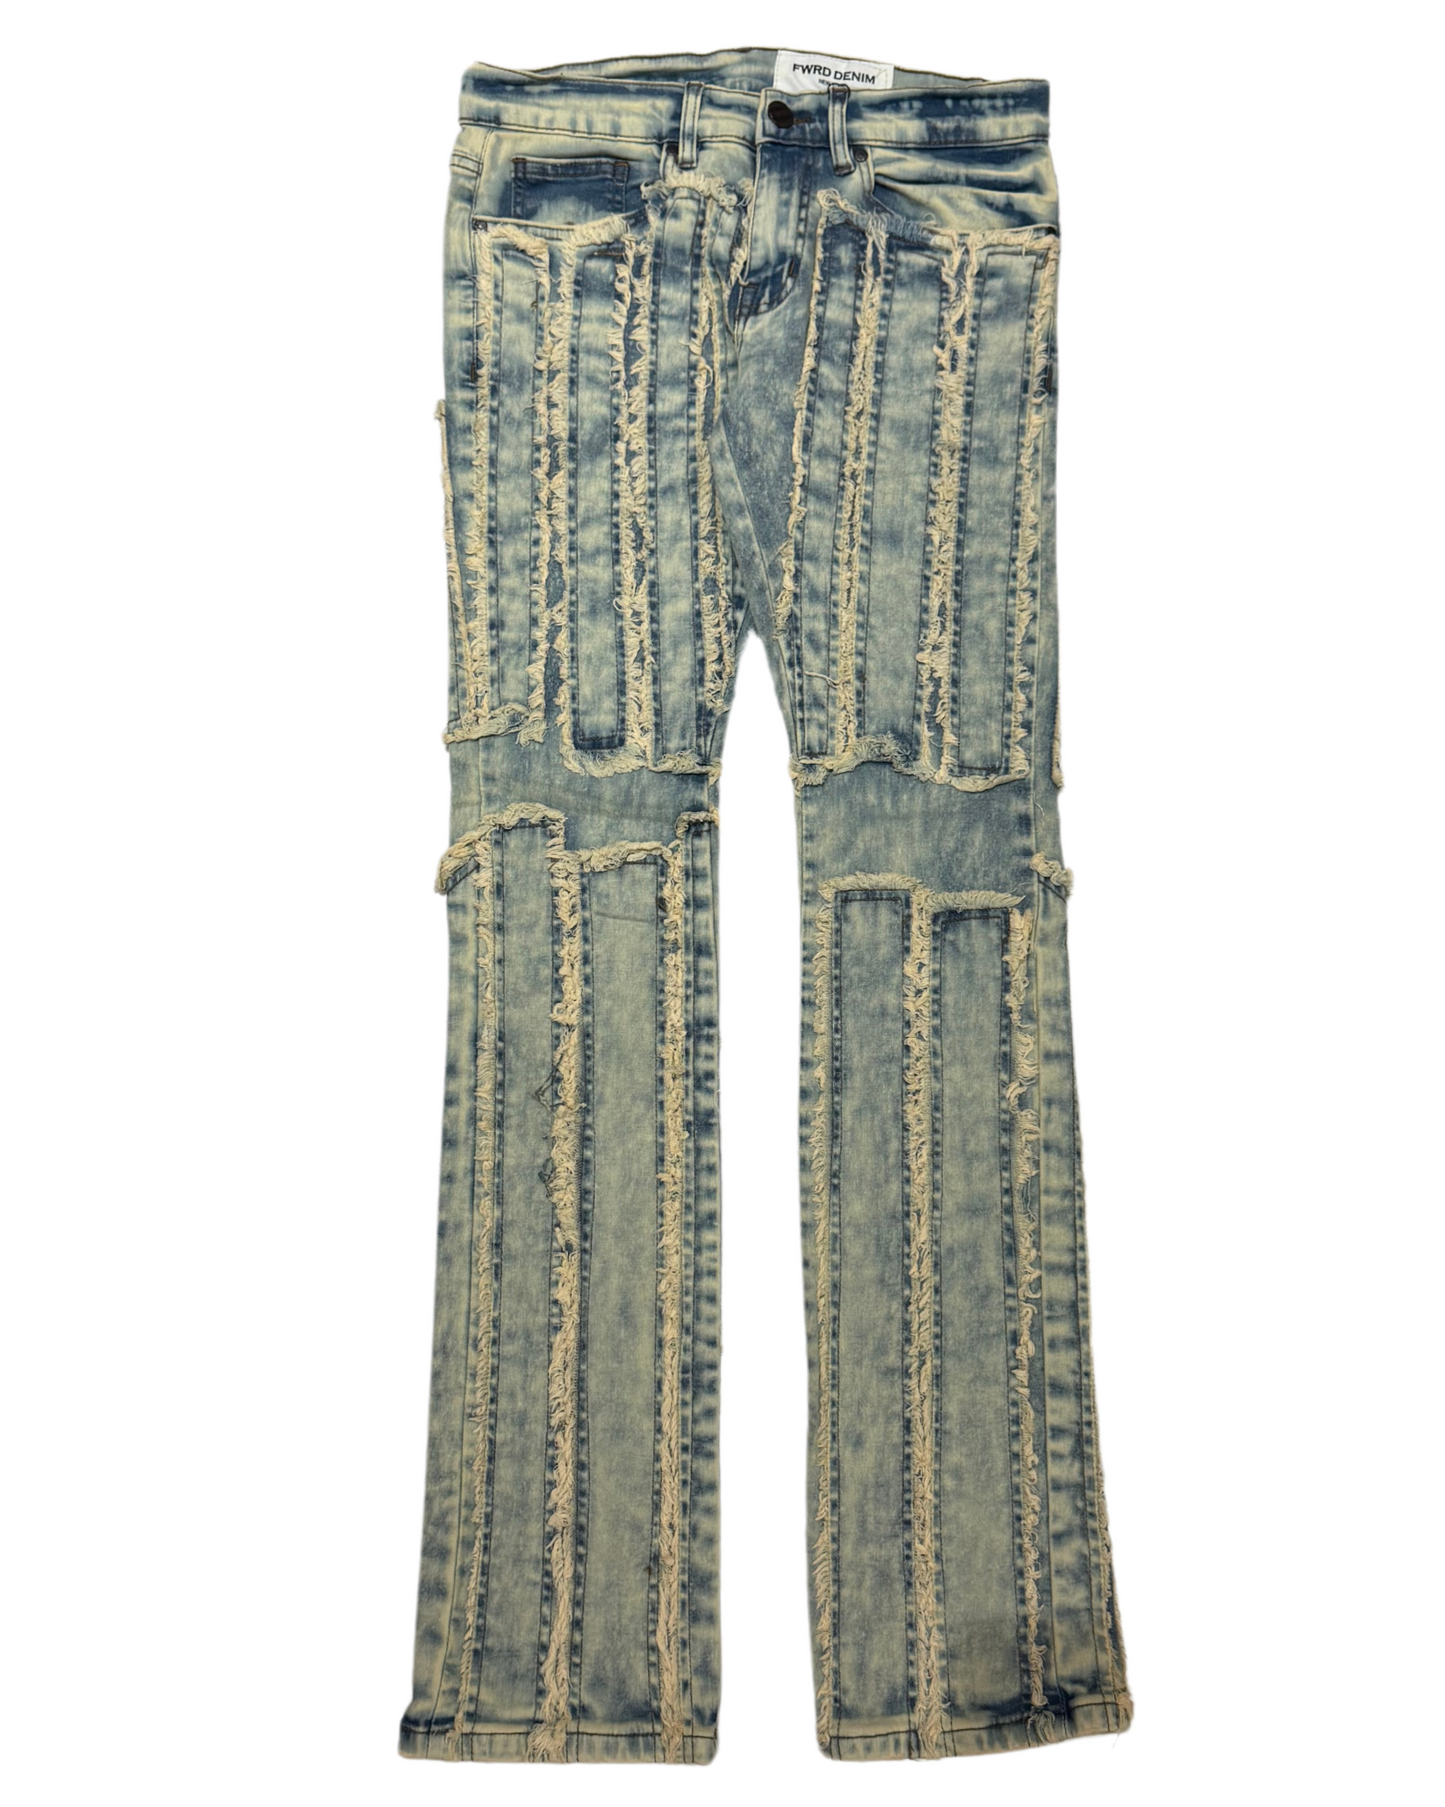 Stacked Jeans 330051